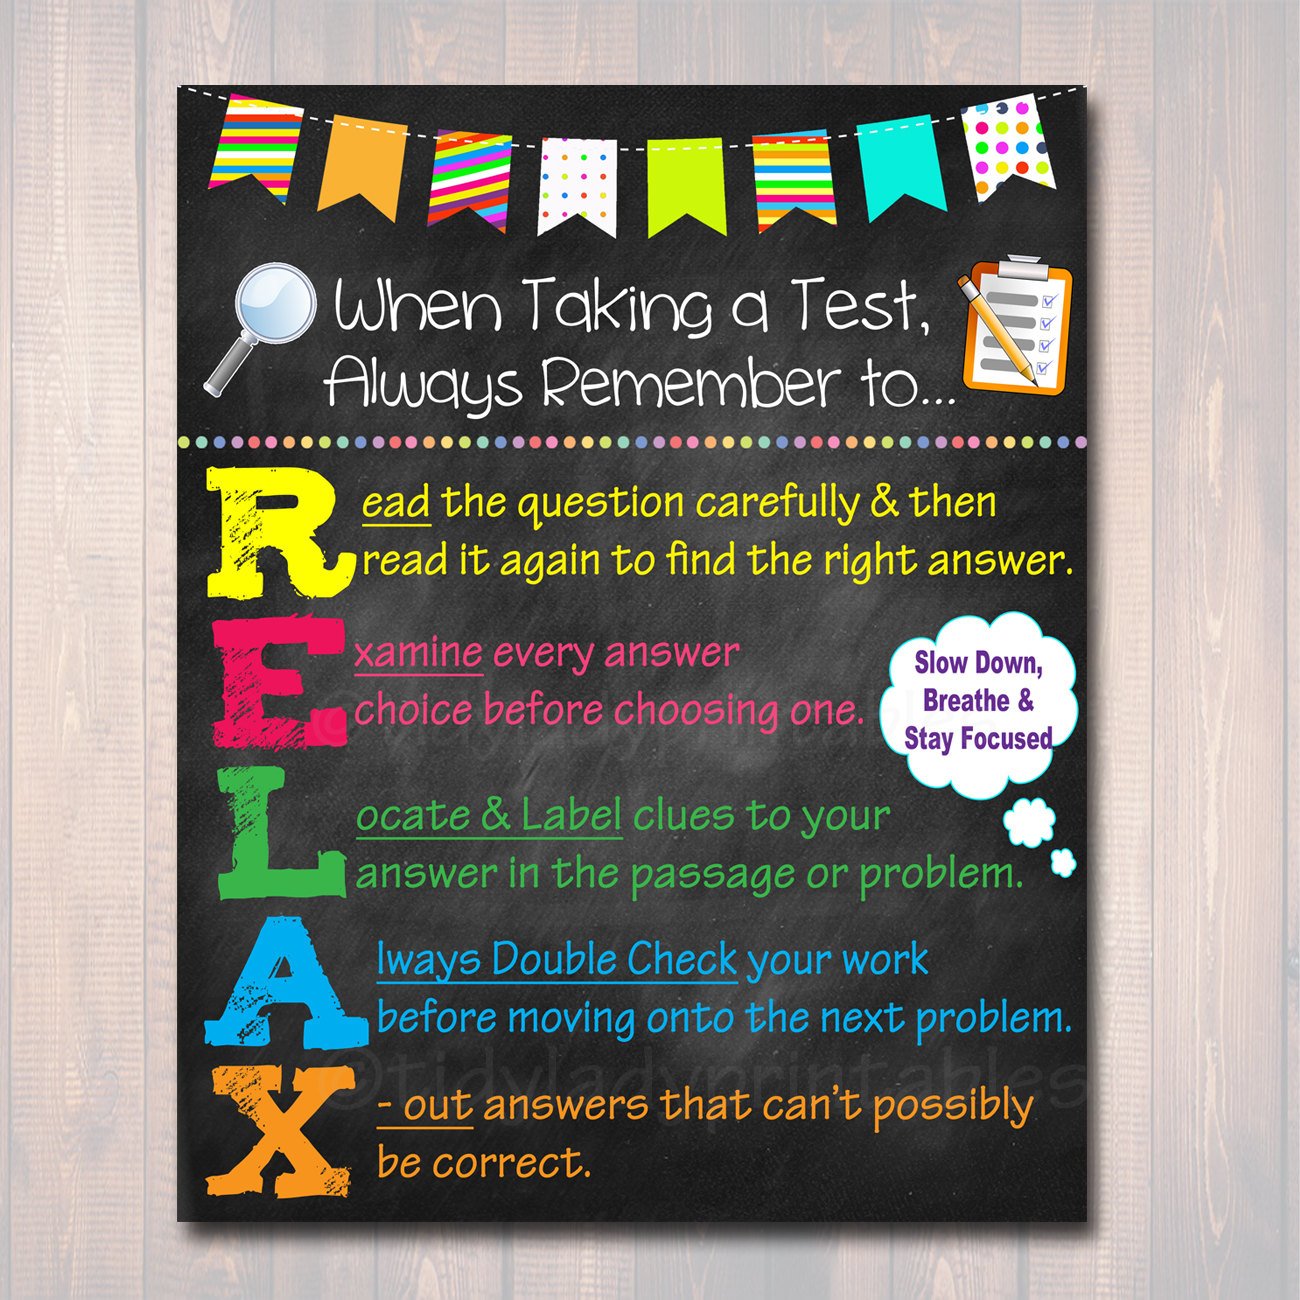 Printable Classroom Poster Pack for Middle School - Maneuvering